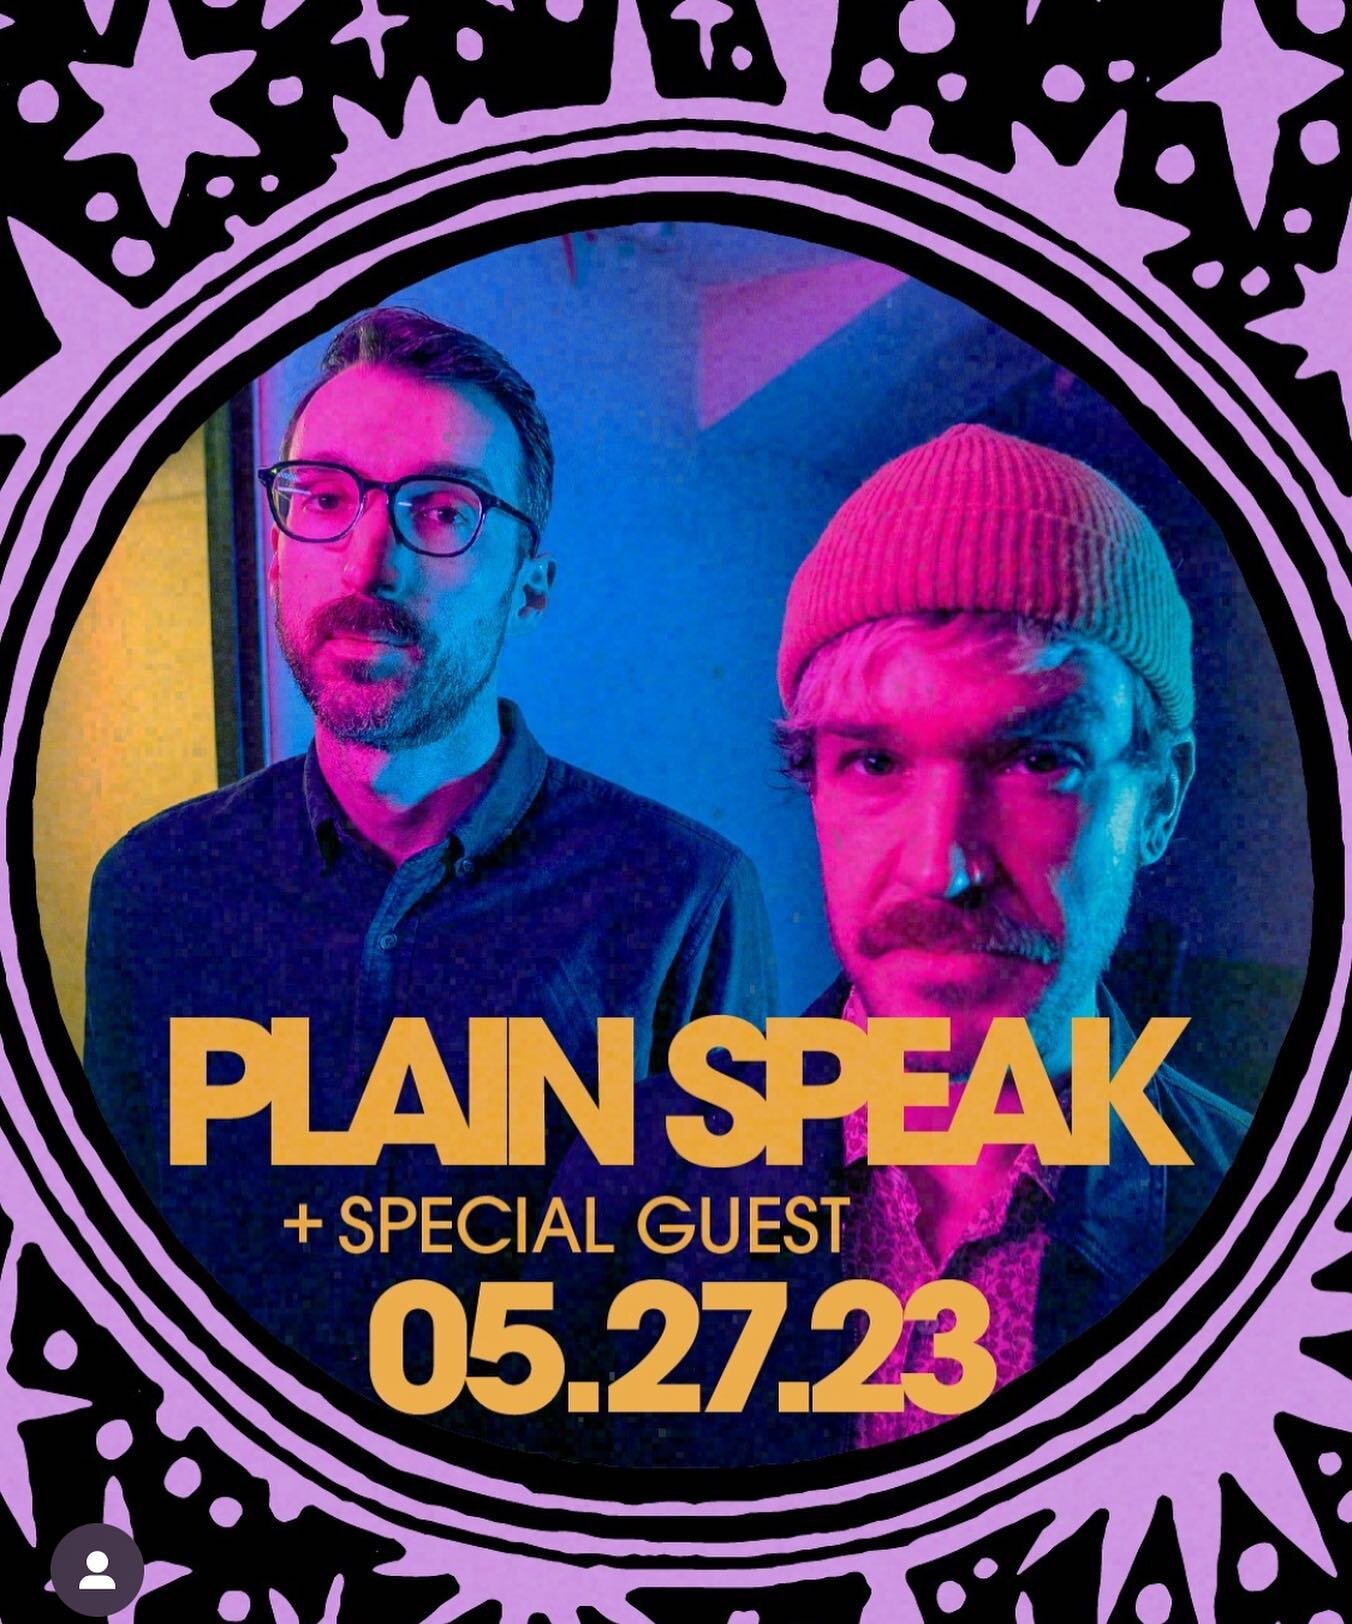 Mark your calendars, book your ticket,  make a plan. We&rsquo;re celebrating the release of &ldquo;Calamity&rdquo; on May 27th at @resonant_head
Special guests to be announced soon 👀
Tickets available at the link in our bio
#plainspeak #calamity #al